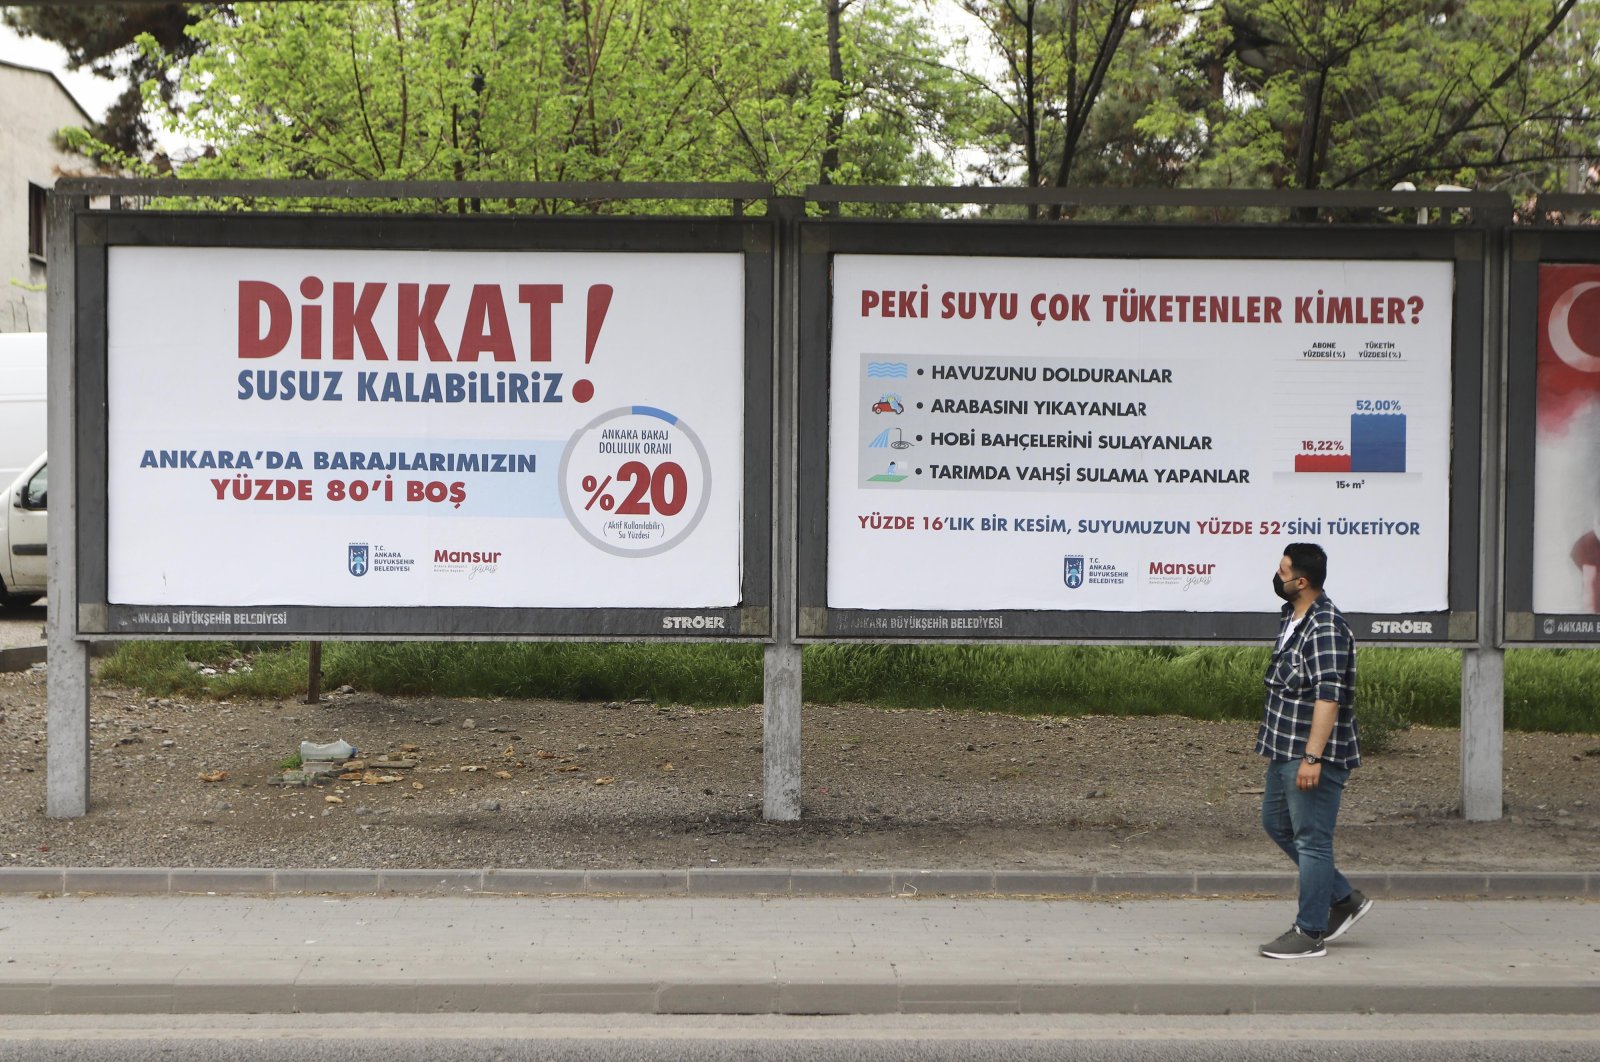 A man walks past posters warning about the water shortage, in the capital Ankara, Turkey, May 4, 2021. (DHA PHOTO)